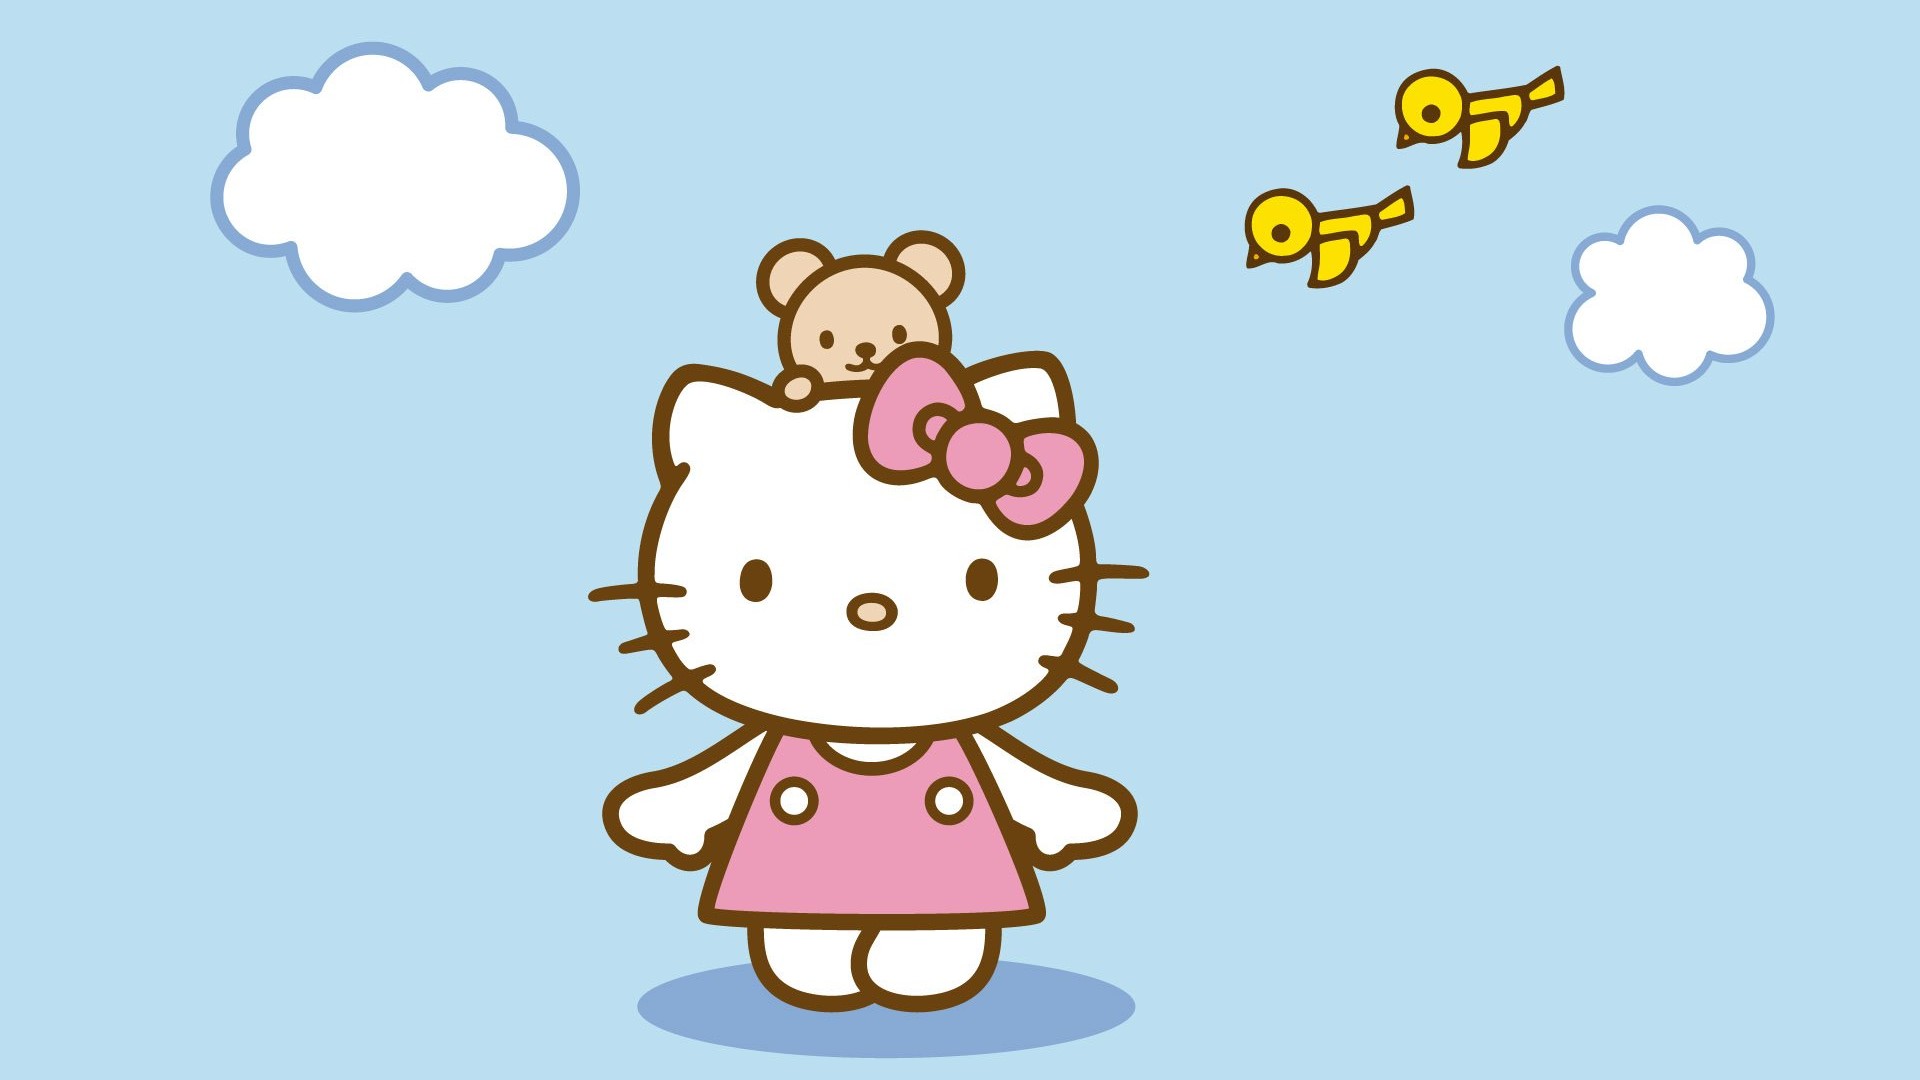 Desktop Wallpaper Hello Kitty Images with image resolution 1920x1080 pixel. You can use this wallpaper as background for your desktop Computer Screensavers, Android or iPhone smartphones